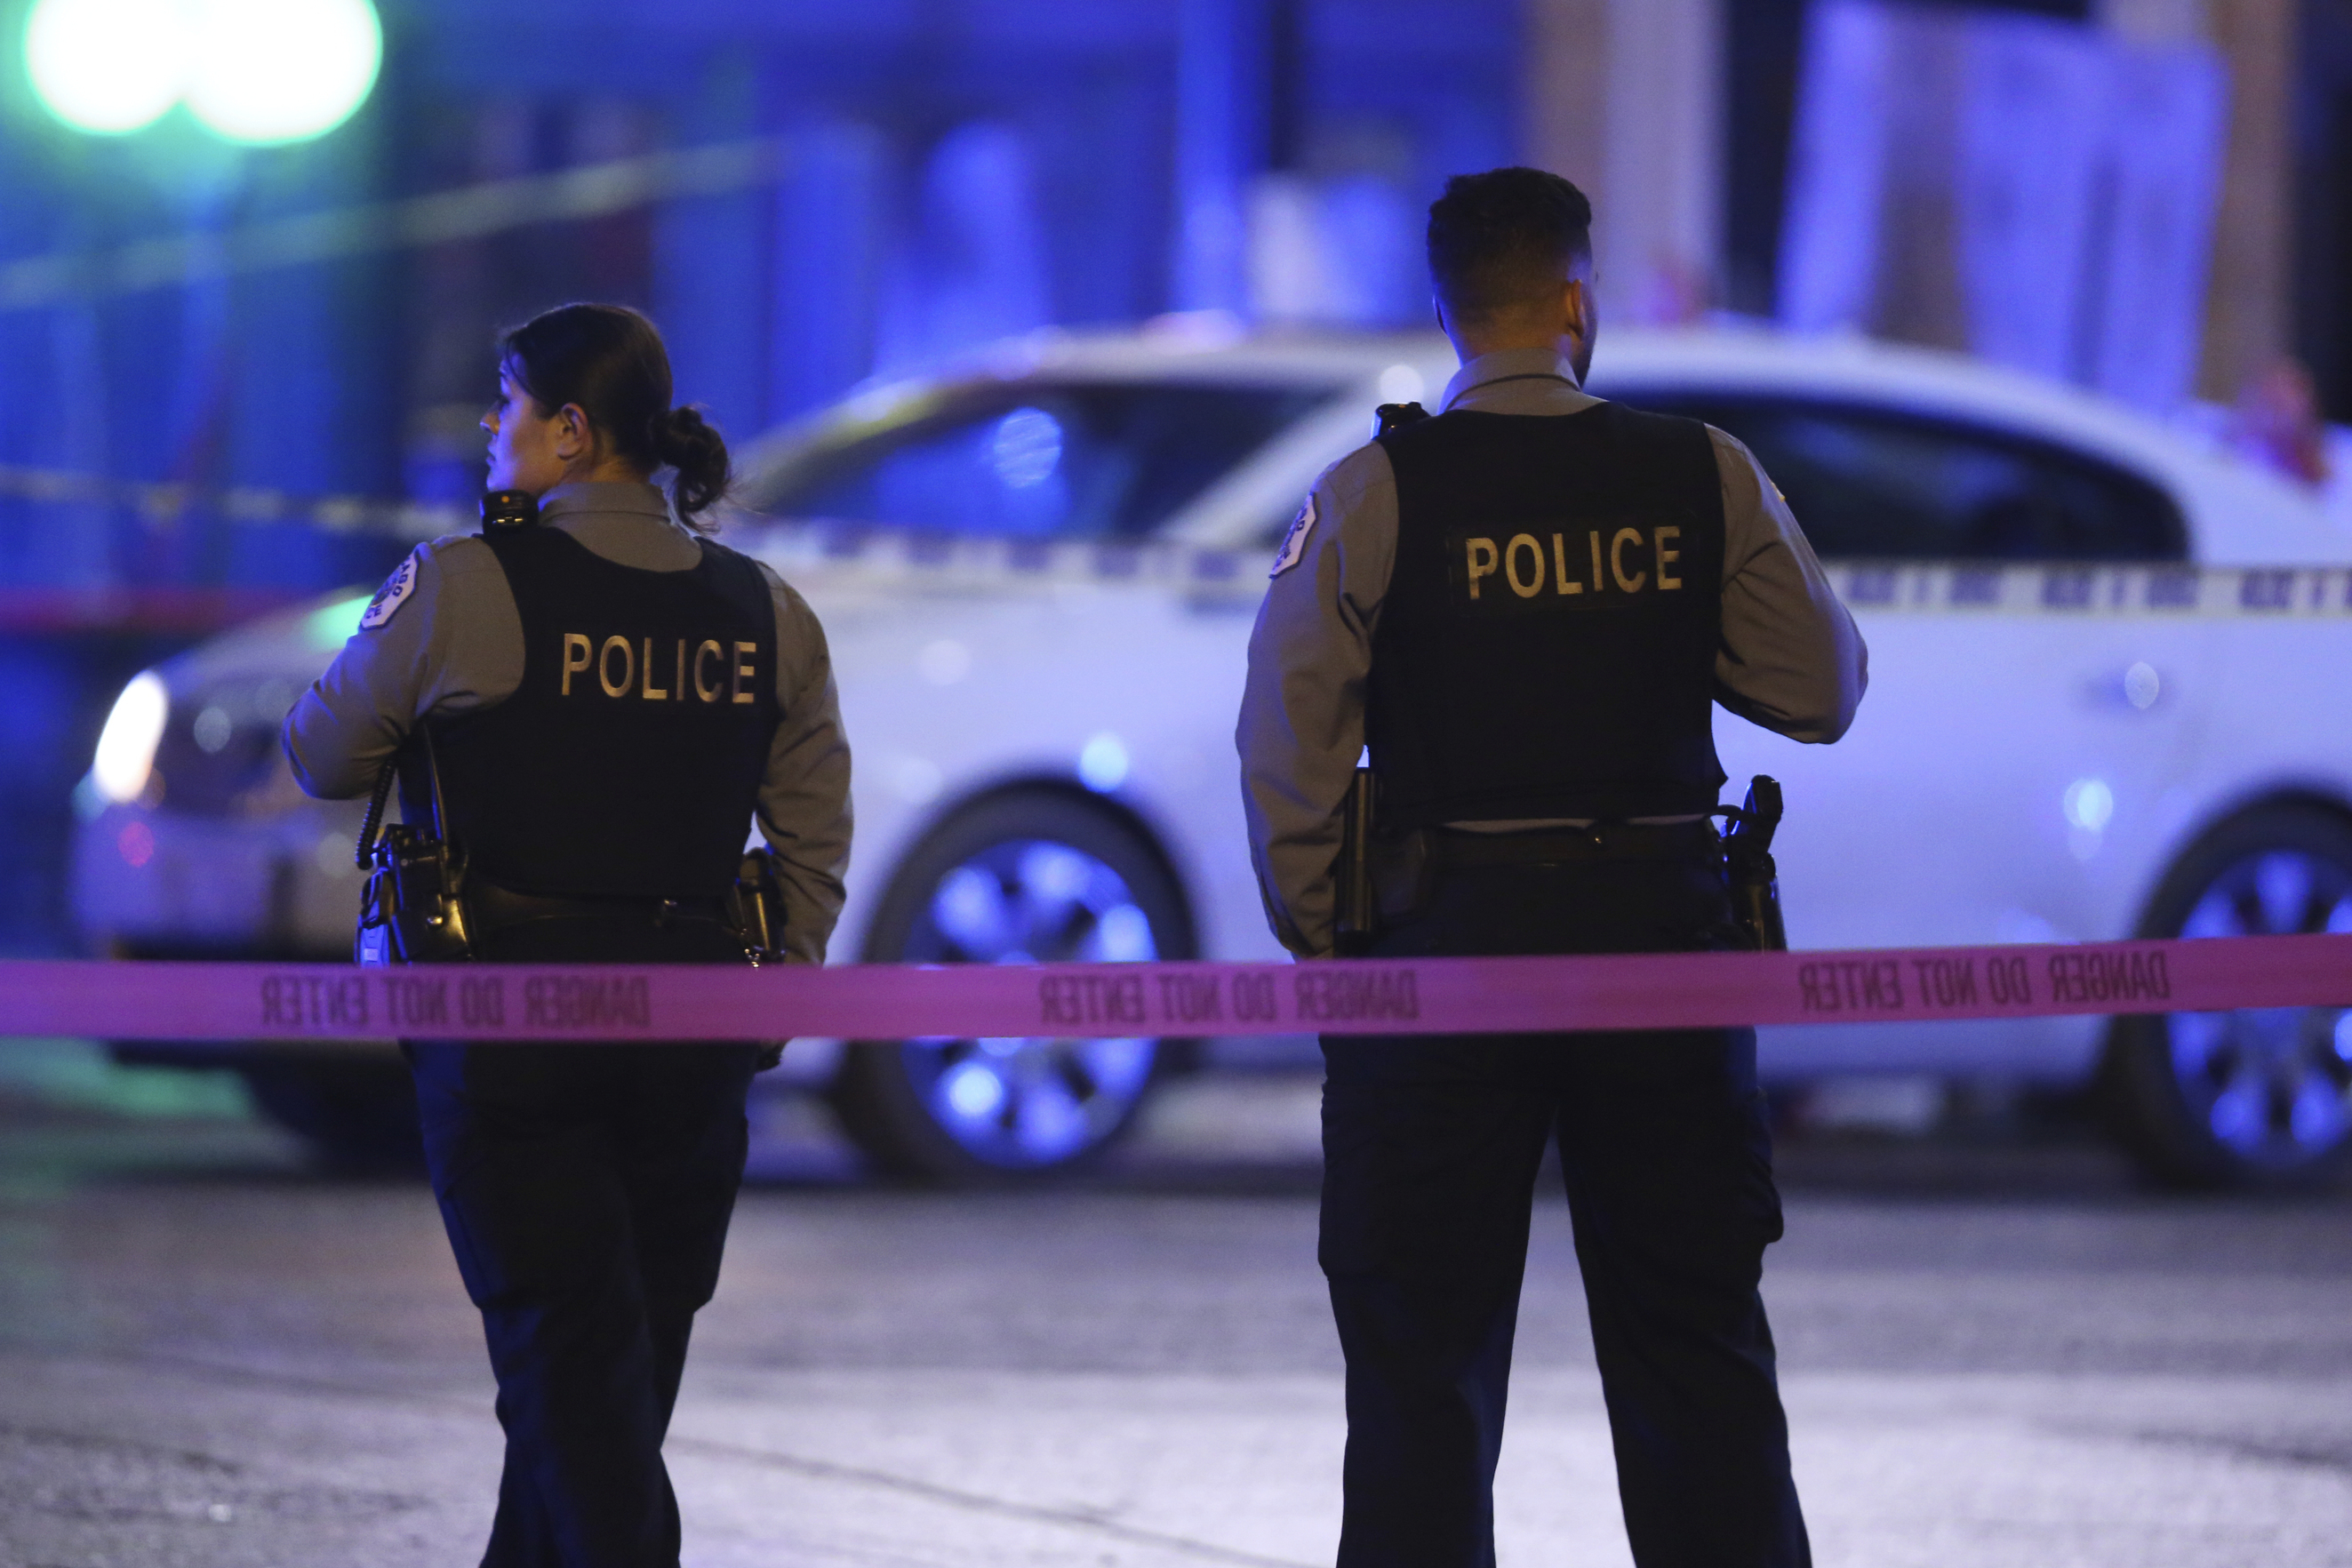 Police work a crime scene  in Chicago on Nov. 19, 2019. Despite a statewide shelter-in-place order in an attempt to stop the spread of the coronavirus, the city is still facing high levels of gun violence. (Chris Sweda—Chicago Tribune/AP)